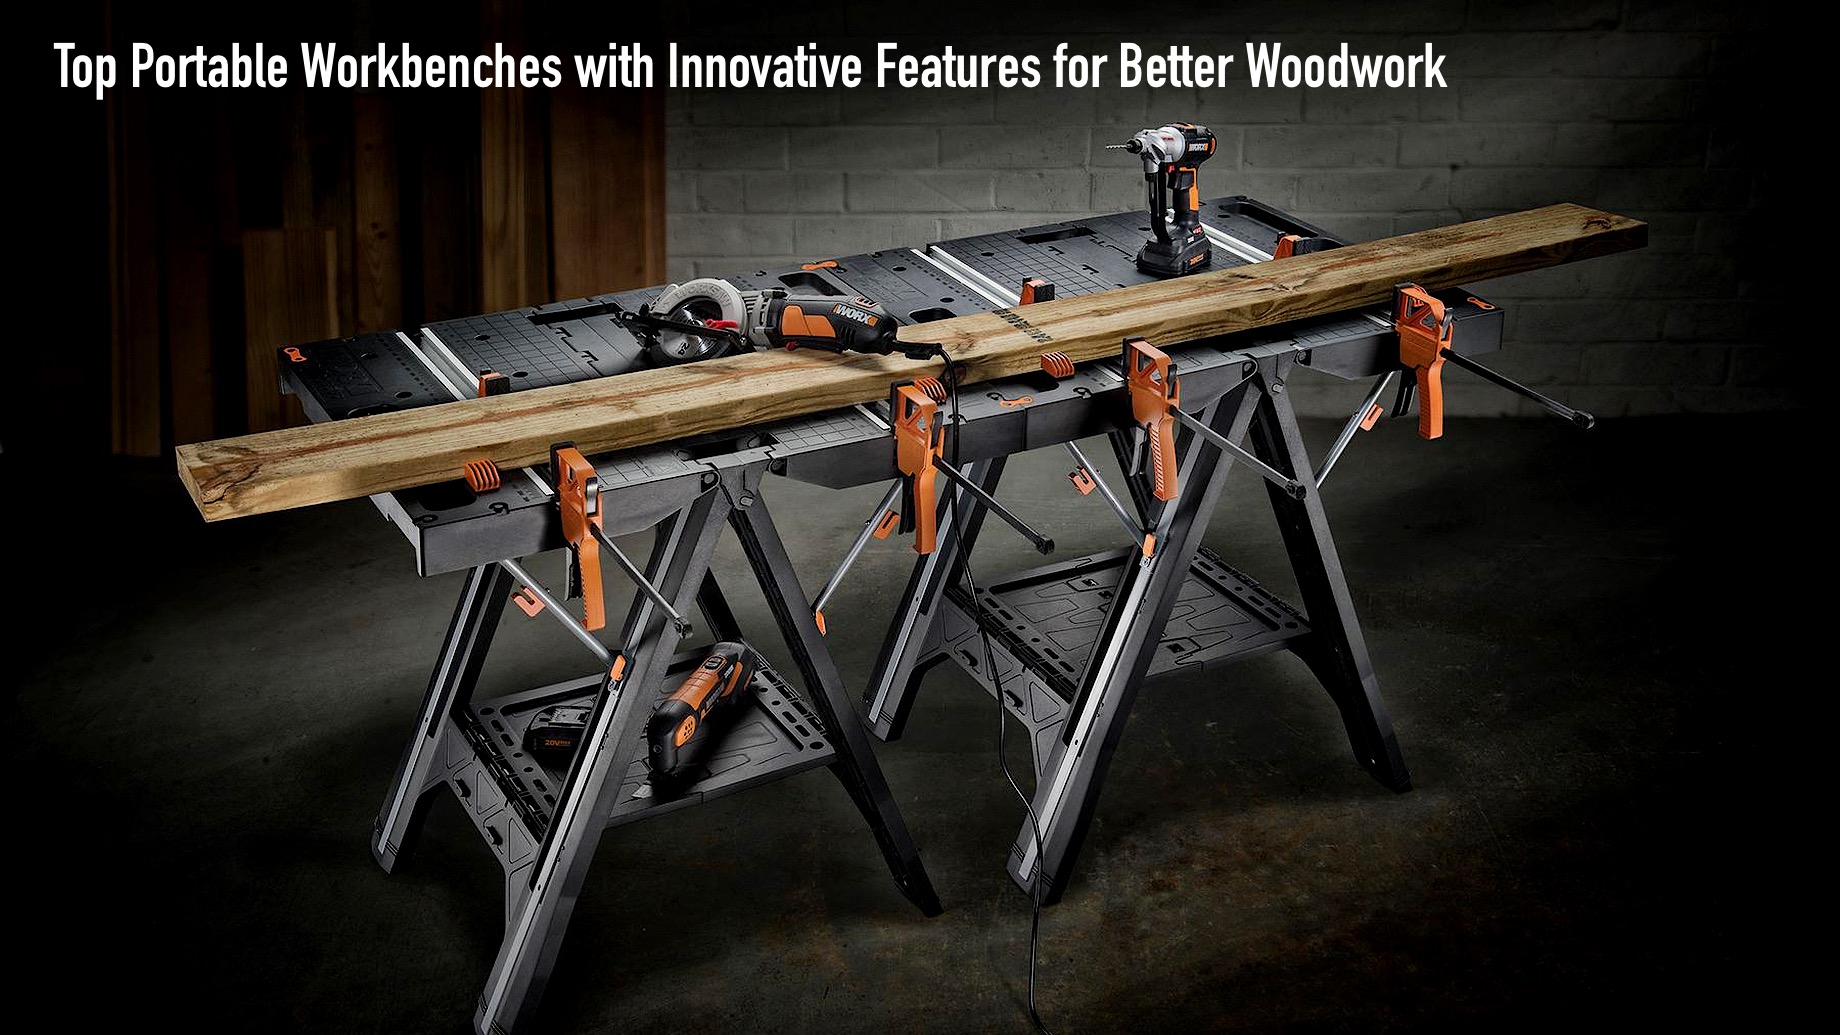 Top Portable Workbenches with Innovative Features for Better Woodwork - Review